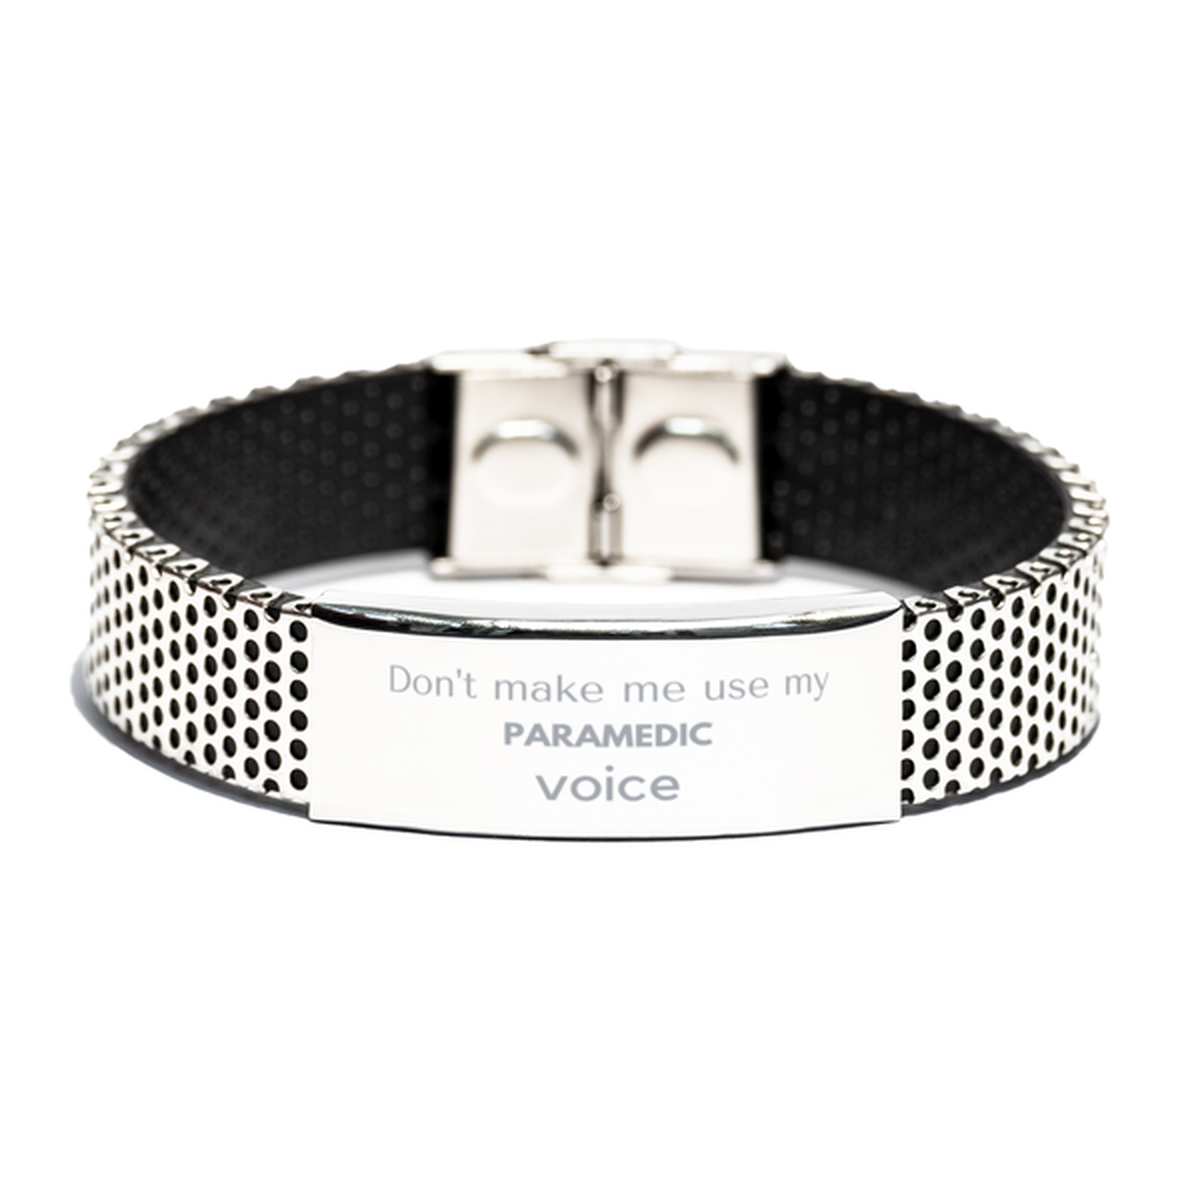 Don't make me use my Paramedic voice, Sarcasm Paramedic Gifts, Christmas Paramedic Stainless Steel Bracelet Birthday Unique Gifts For Paramedic Coworkers, Men, Women, Colleague, Friends